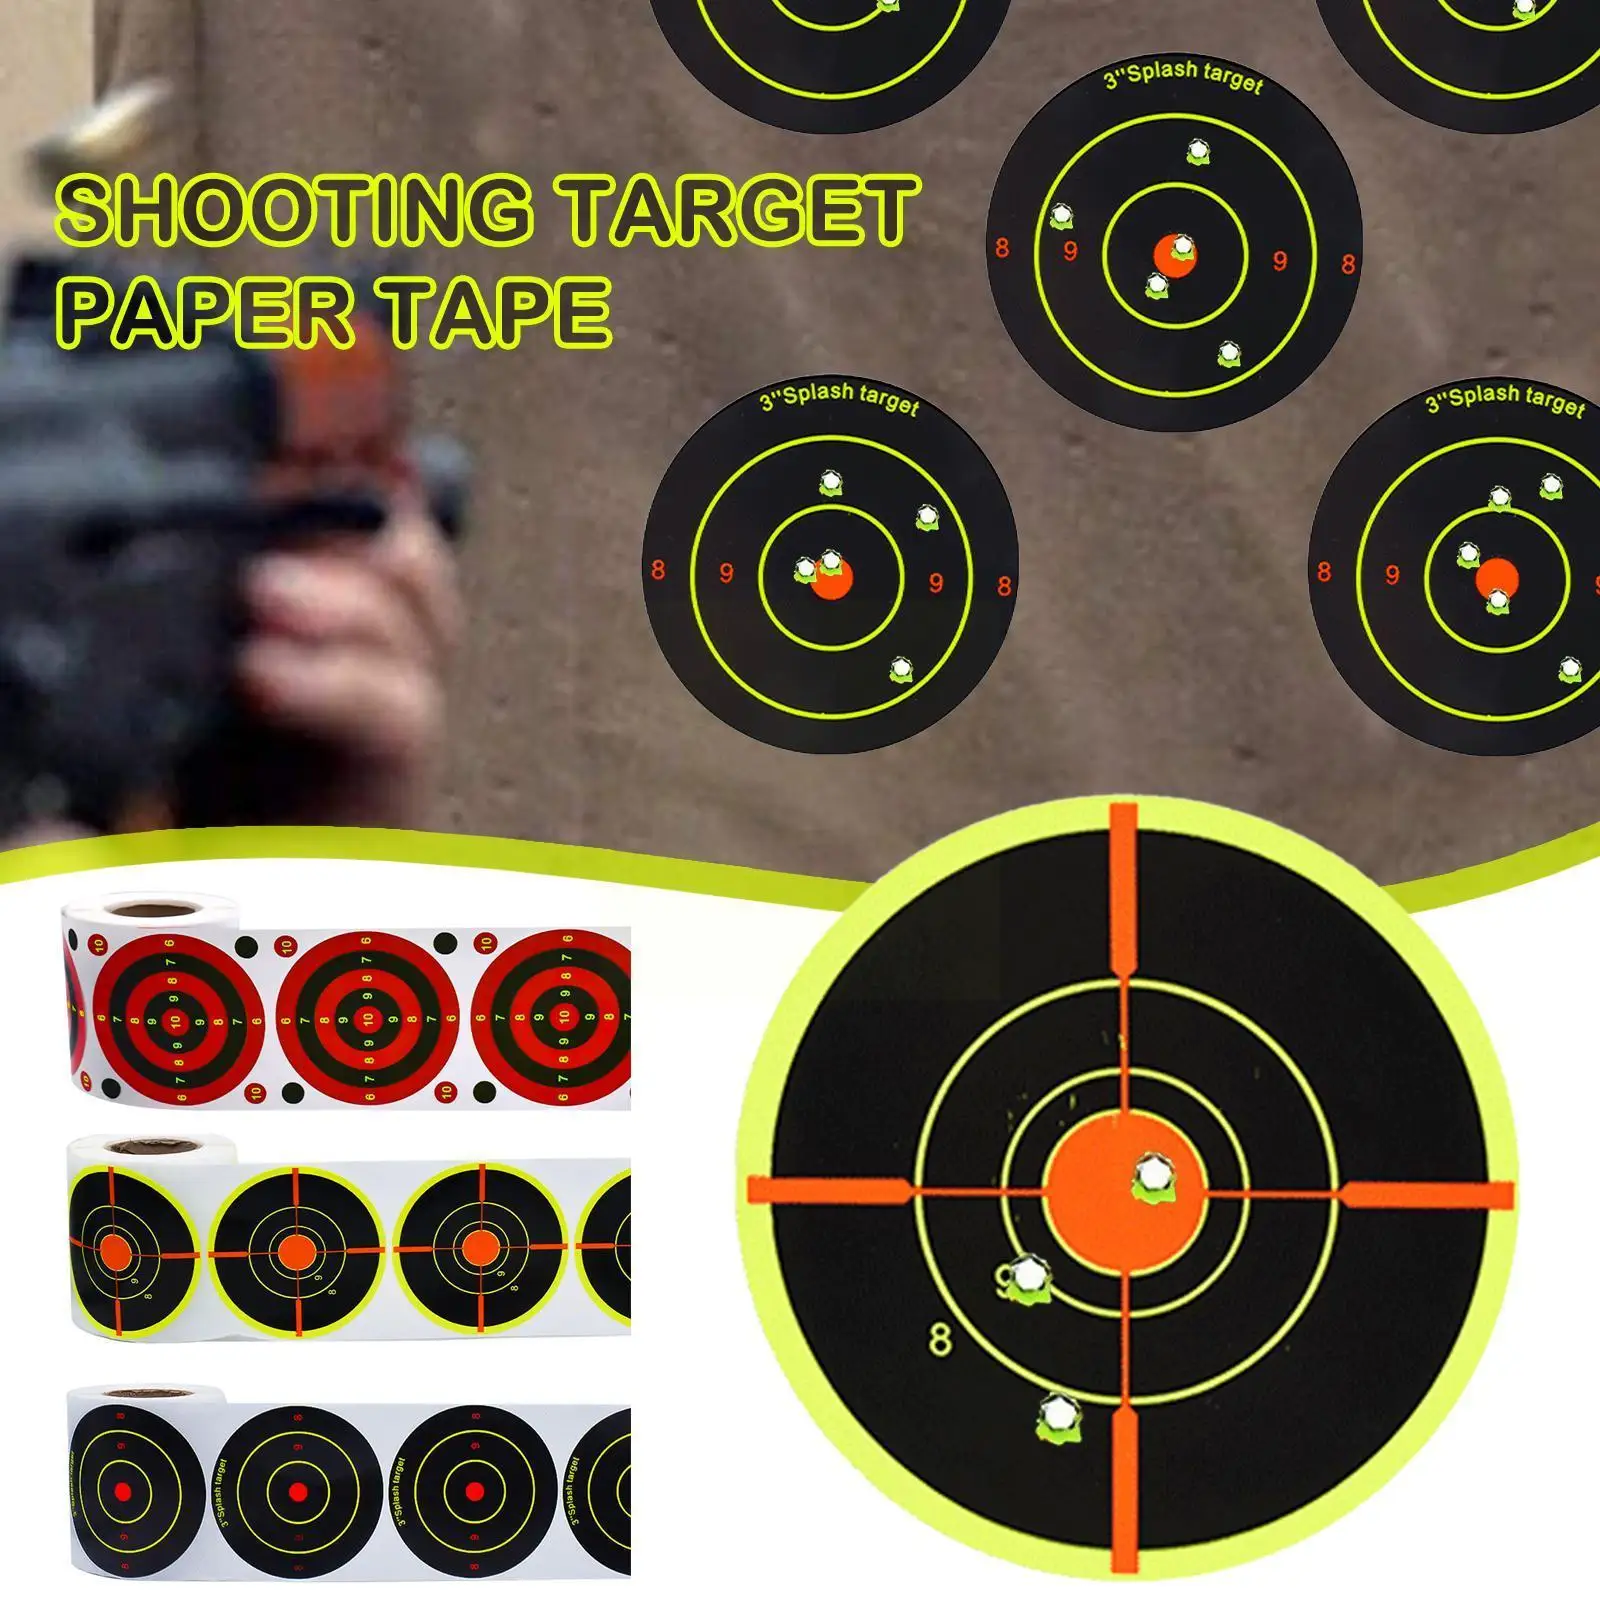 

New 200pcs Shooting Splatter Target Self-adhesive Shoot Flower Objective Targets Stickers For Archery Bow Hunting Shooting F4o8